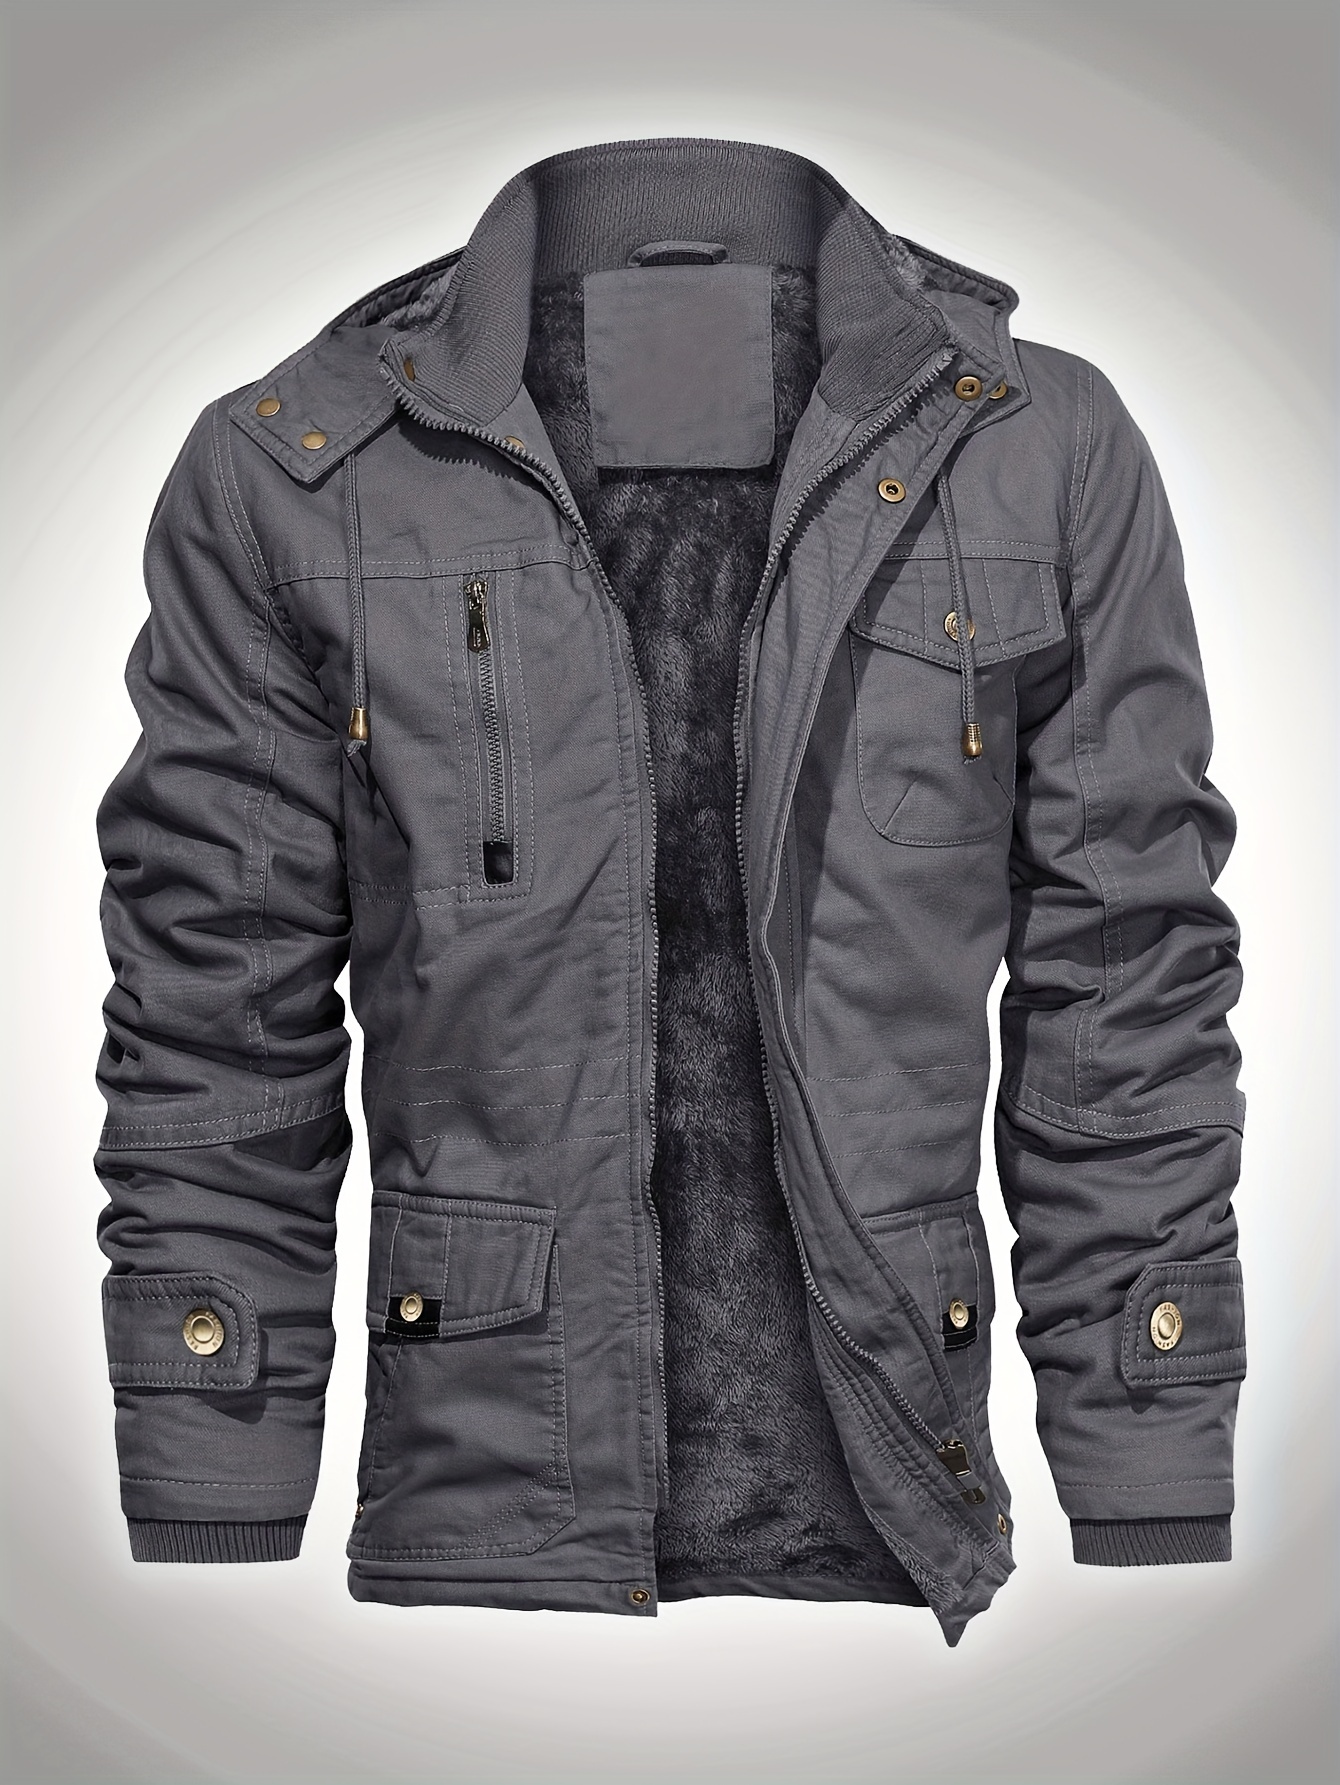 Smart Hooded Cotton Military Style Men's Winter Jacket